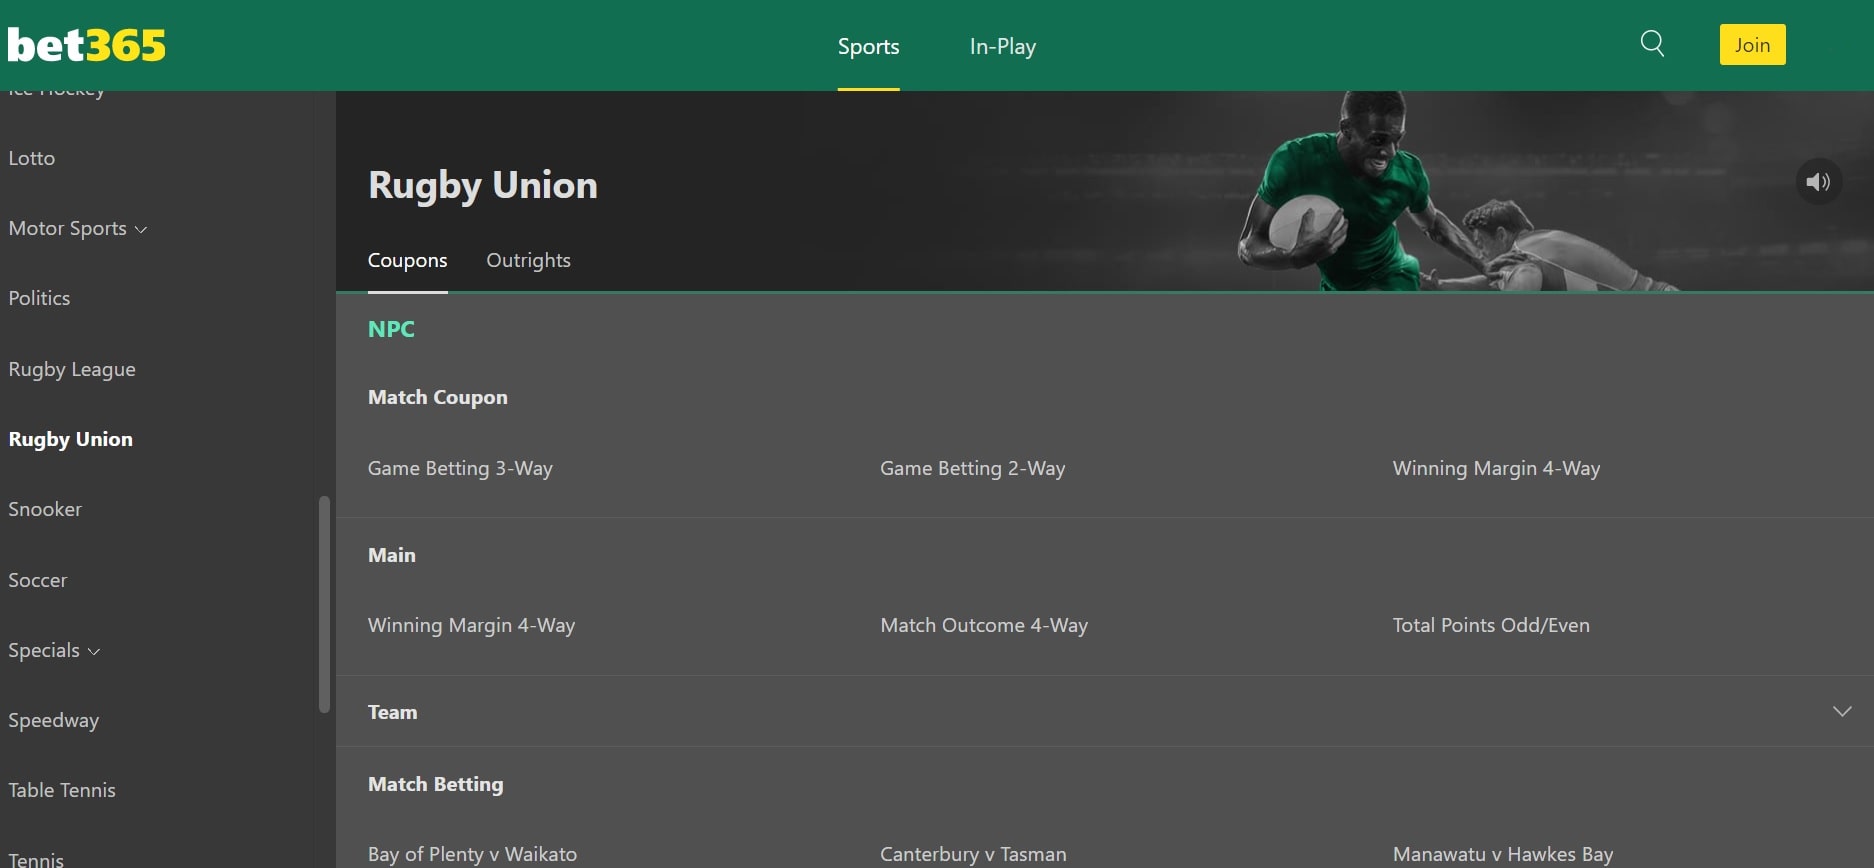 Bet365 rugby streaming sites min